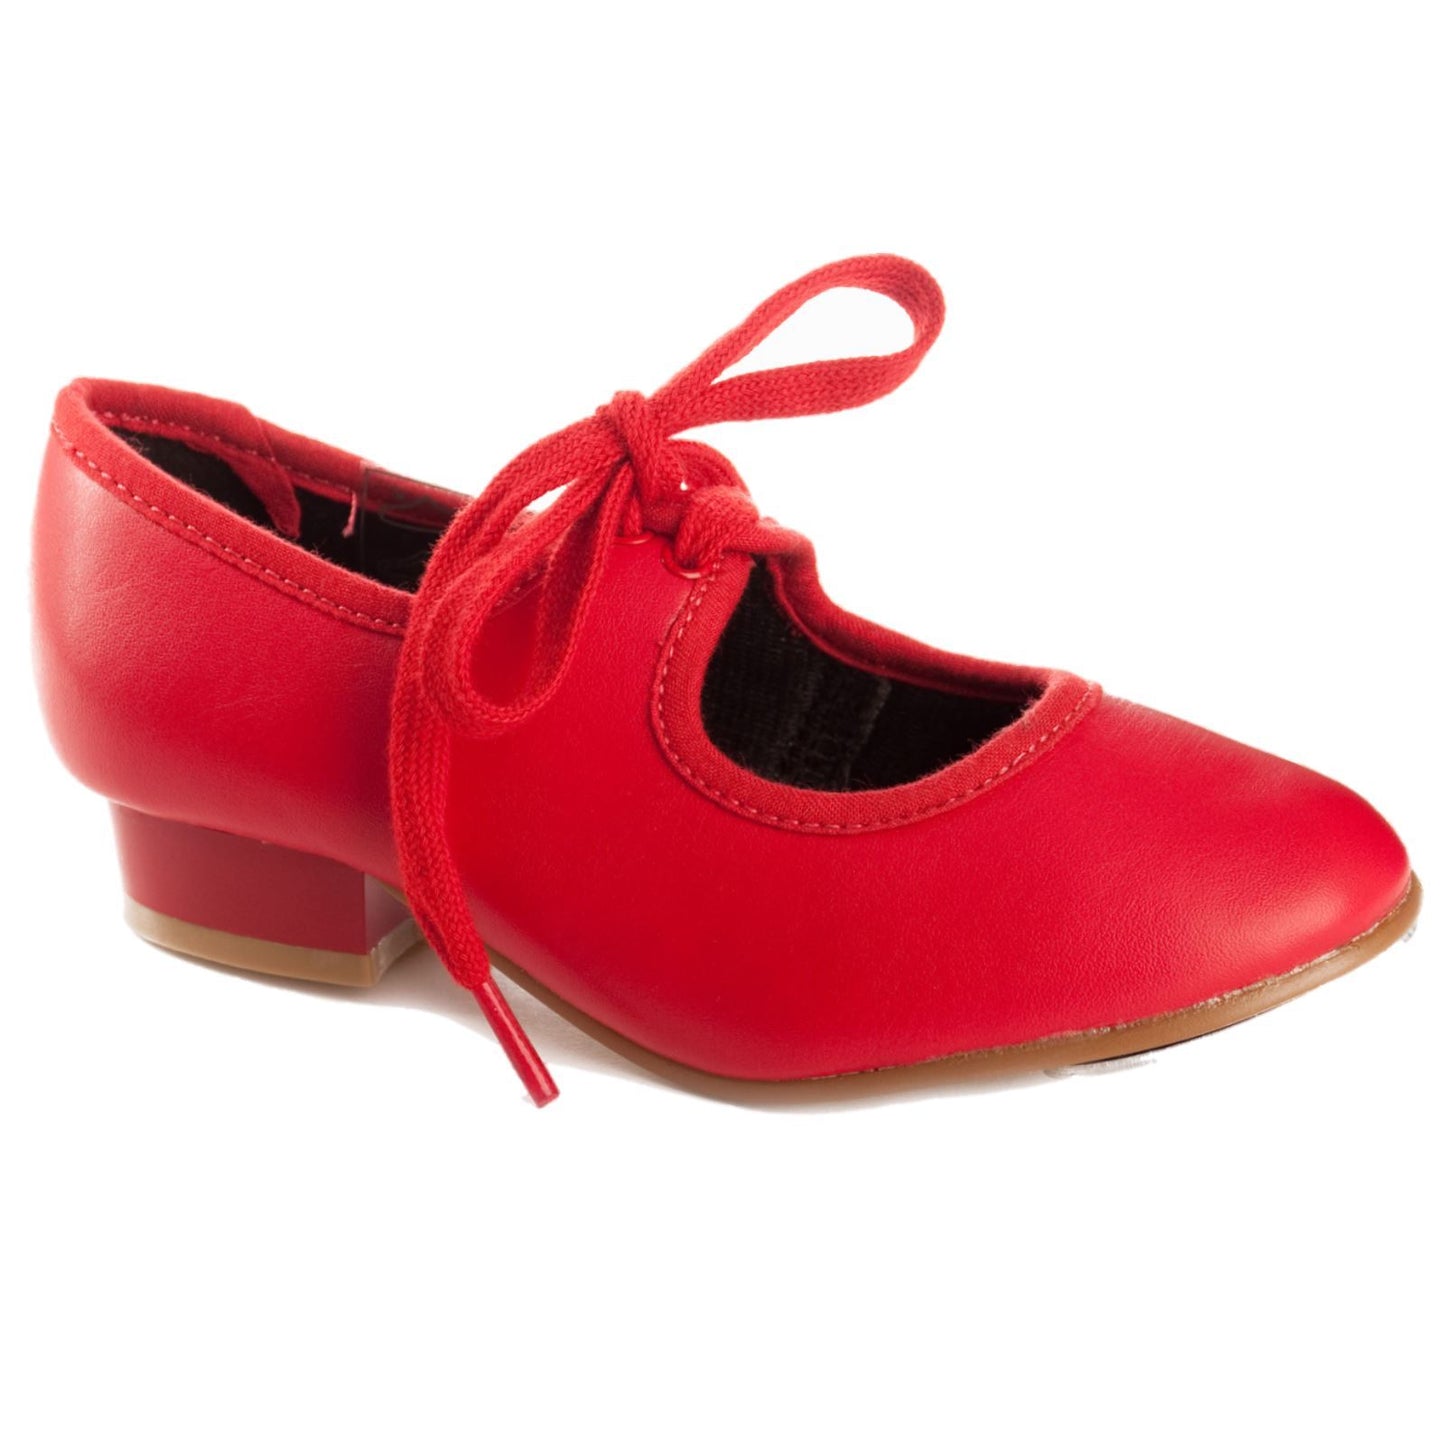 RED PU LOW HEEL TAP SHOES - ADULT SIZE 8 Dance Shoes Dancers World 